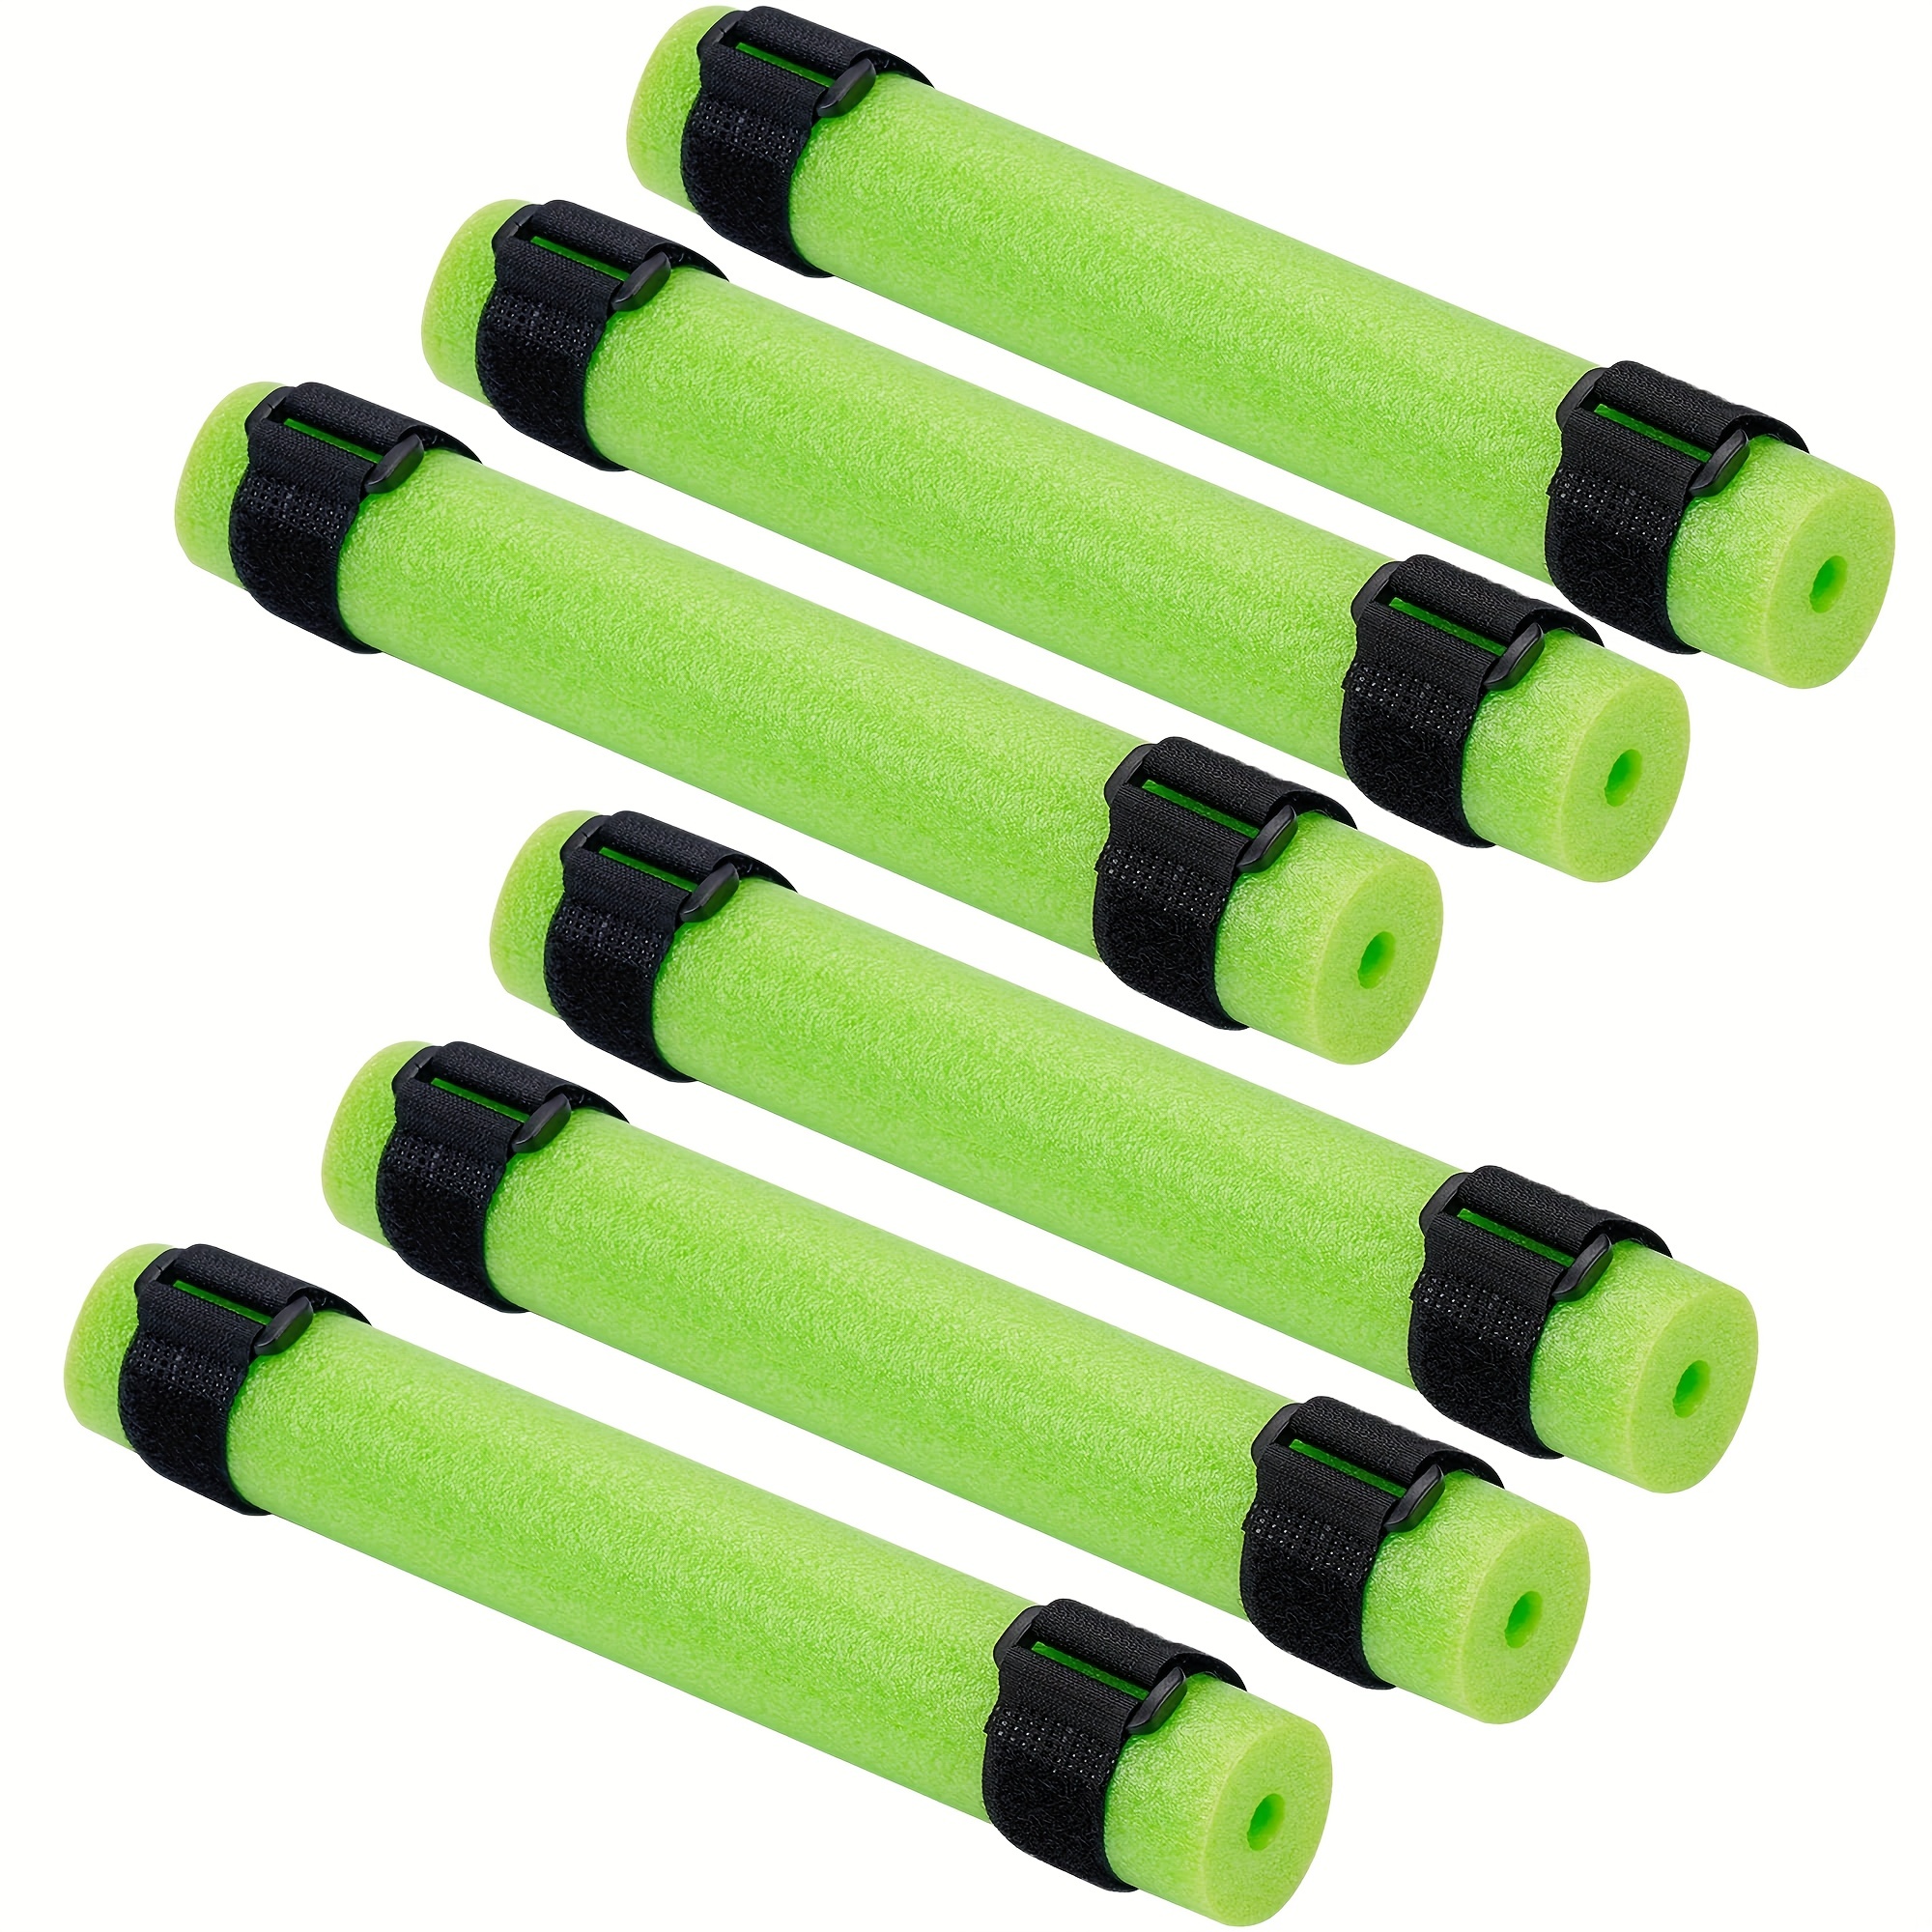 Shitailu 6PCS Fishing Rod Float, Floating Rod Butt Cushion, Fishing Float Tube Accessories, Kayak Fishing Rod Floater For Prevent The Narrow Rod Goes